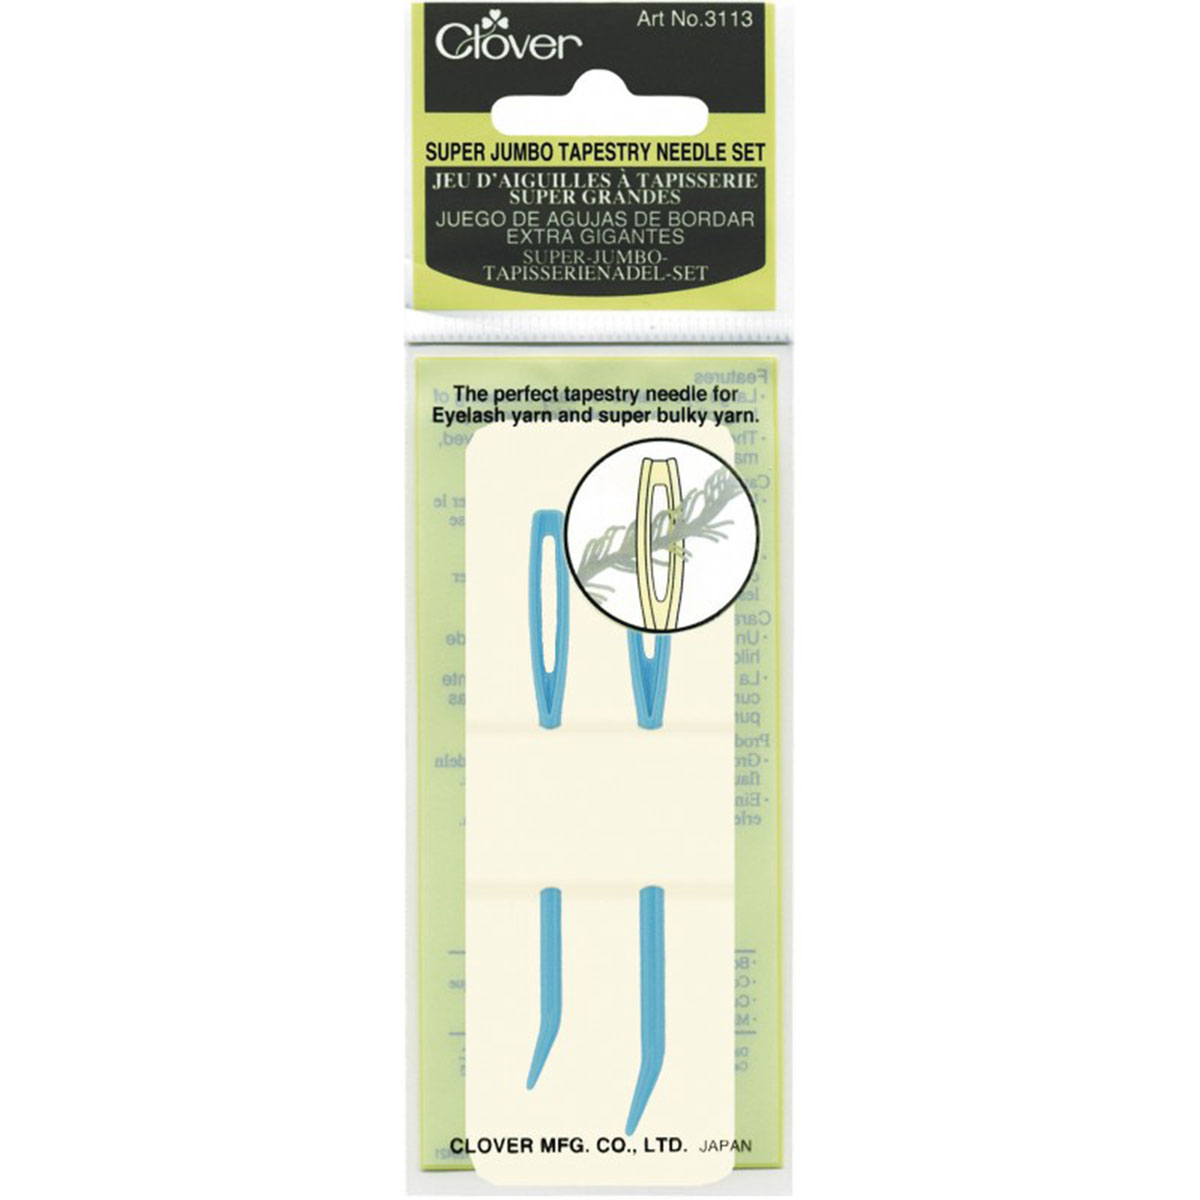 Clover Tapestry Needle Set - Super Jumbo Tapestry Needles - Bent Tip (3113)  at Jimmy Beans Wool